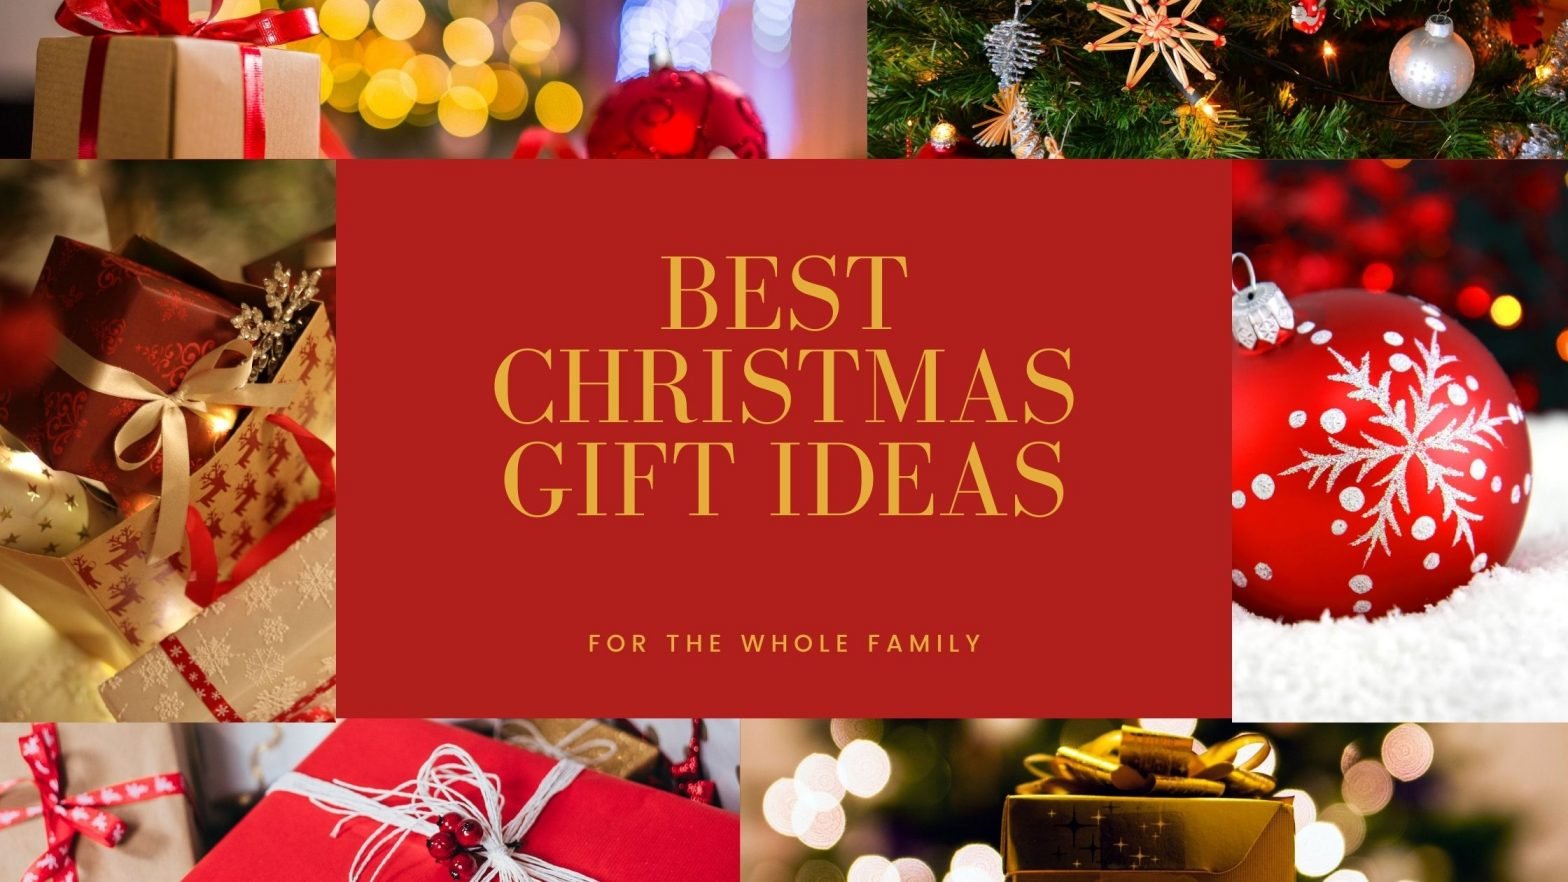 Best Christmas Gift Ideas for the Whole Family